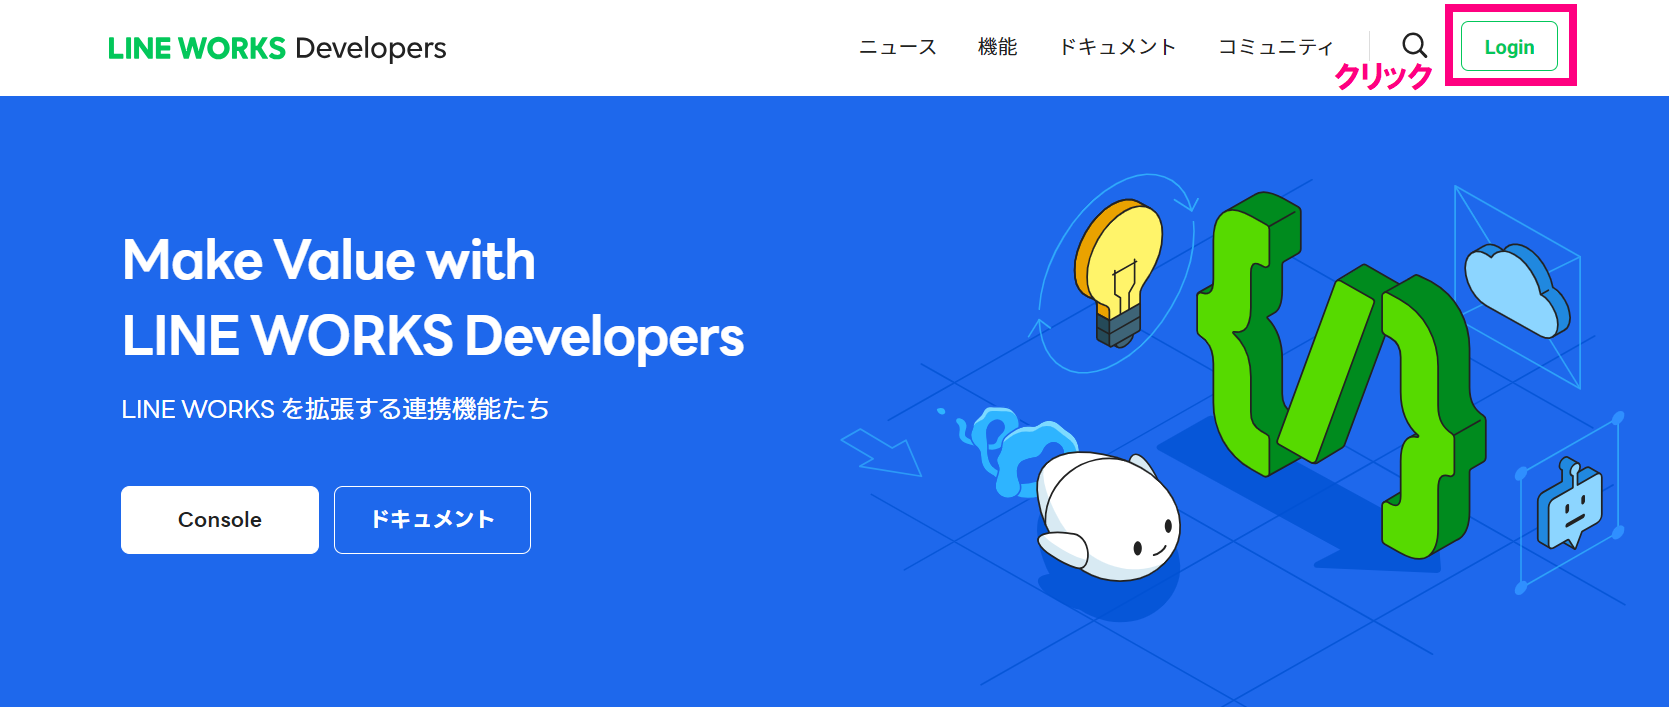 step10_LINE WORKS Developersログイン.png